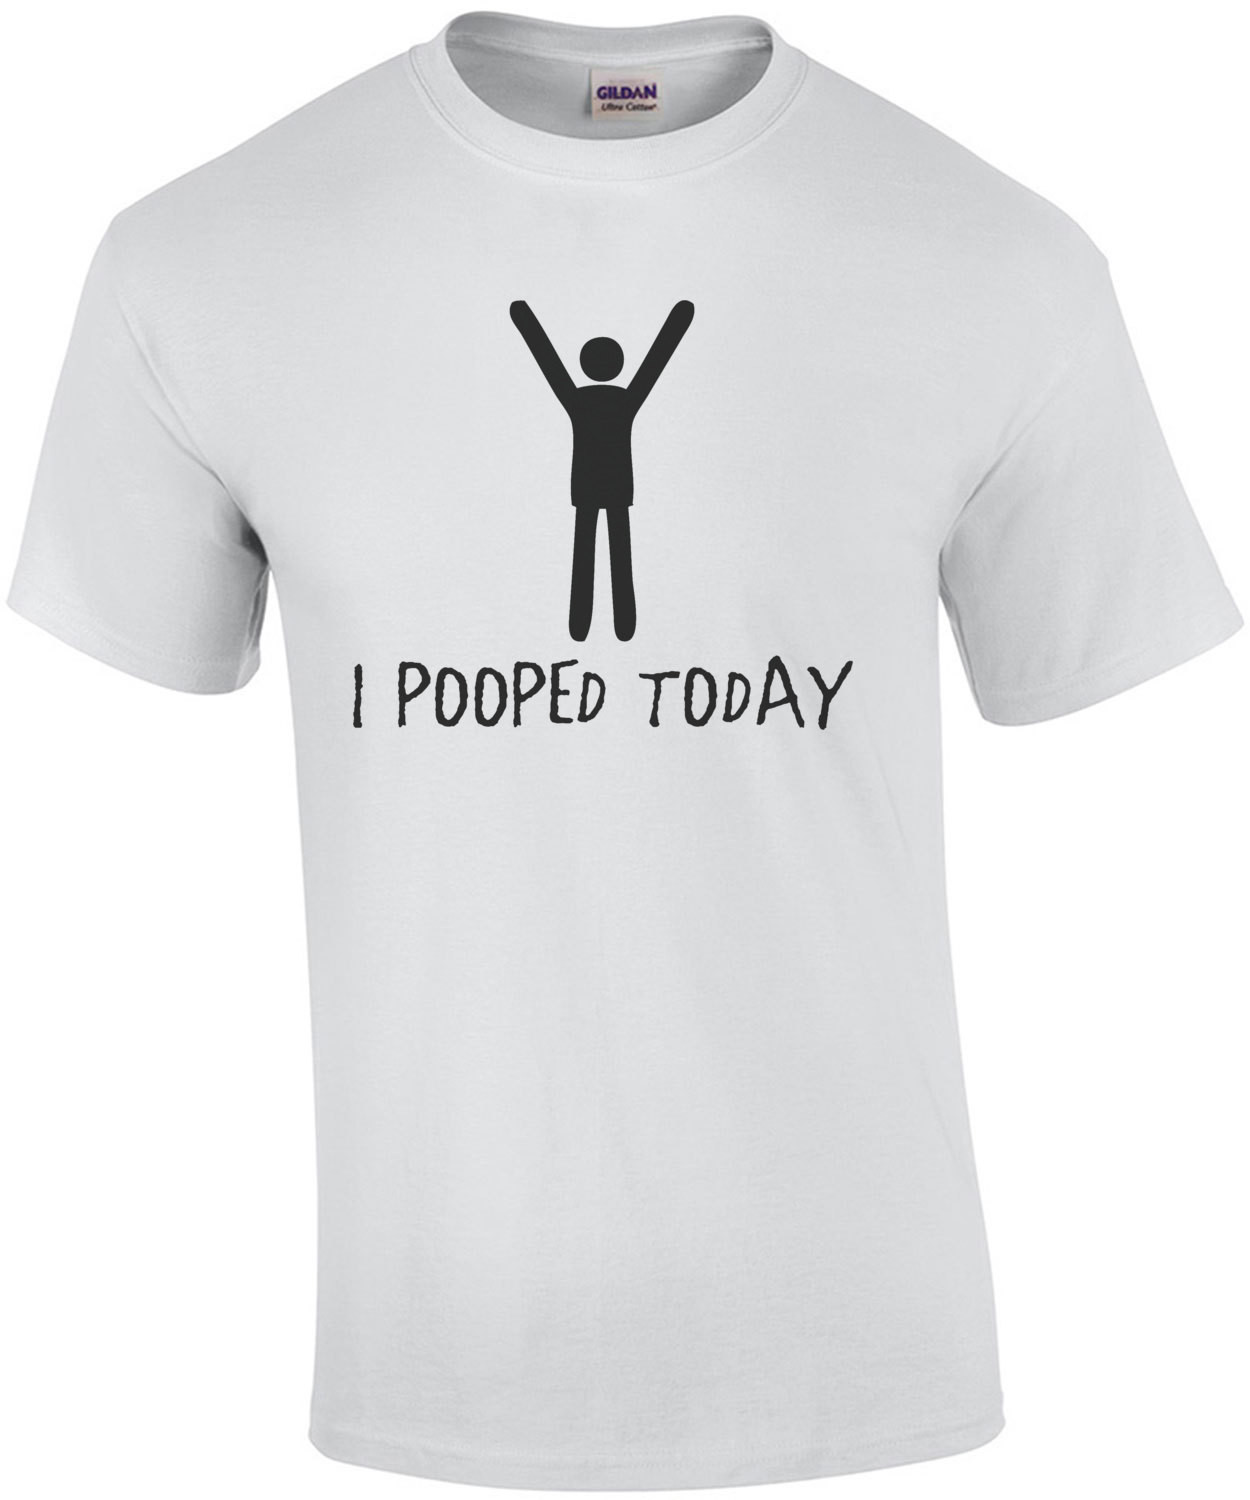 I pooped today - funny poop